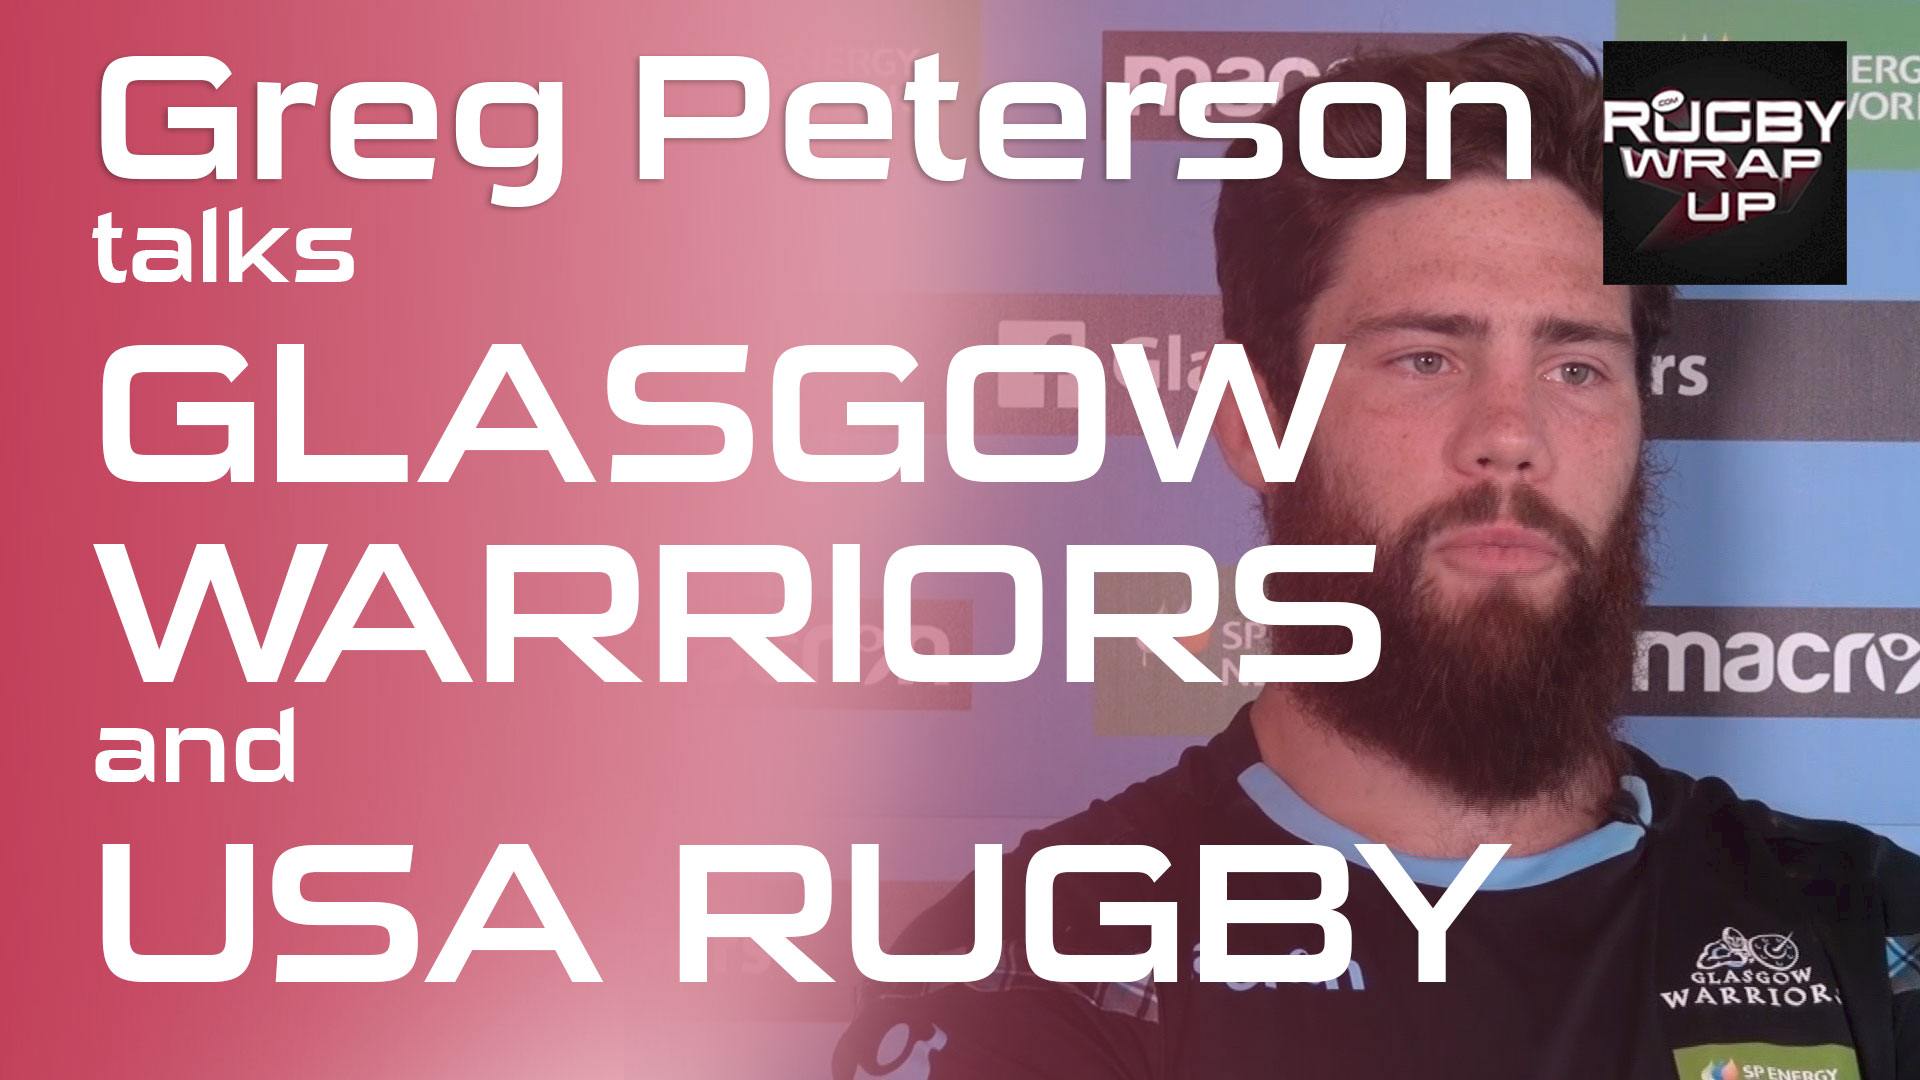 Greg-Peterson-Glasgow-Warriors-and-USA-Rugby, Rugby_Wrap_Up